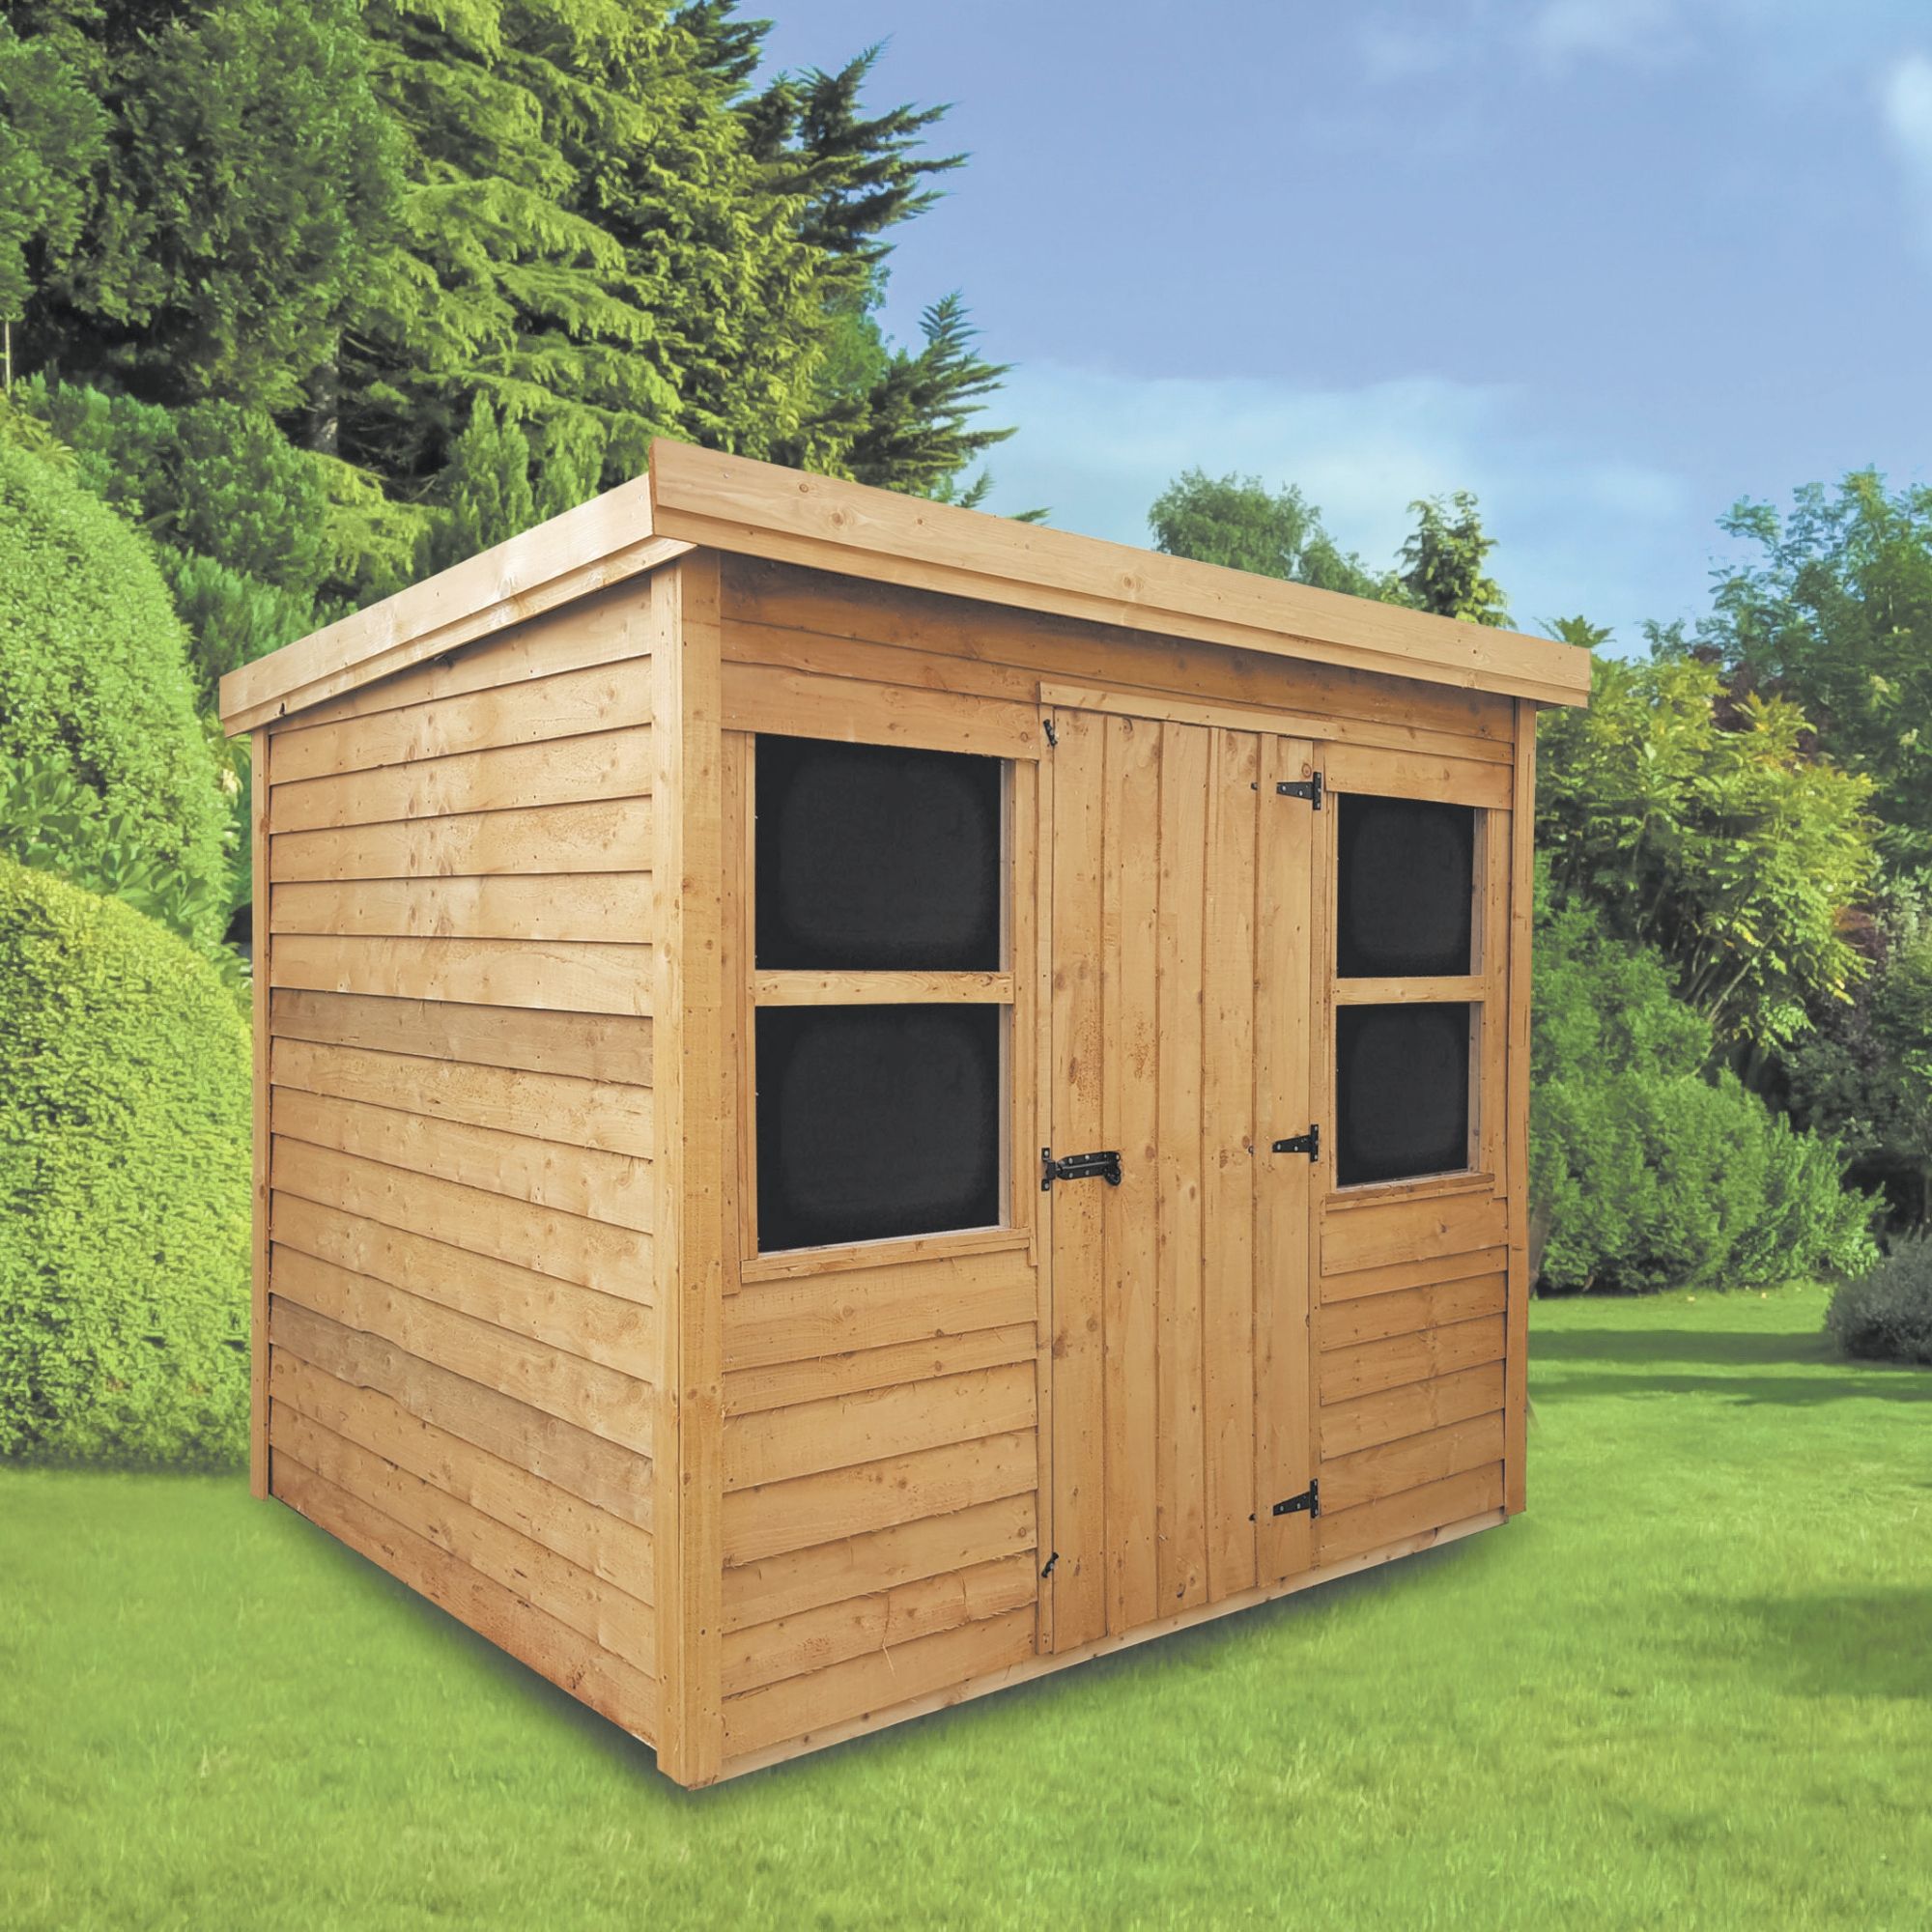 Wooden lean to shed roof